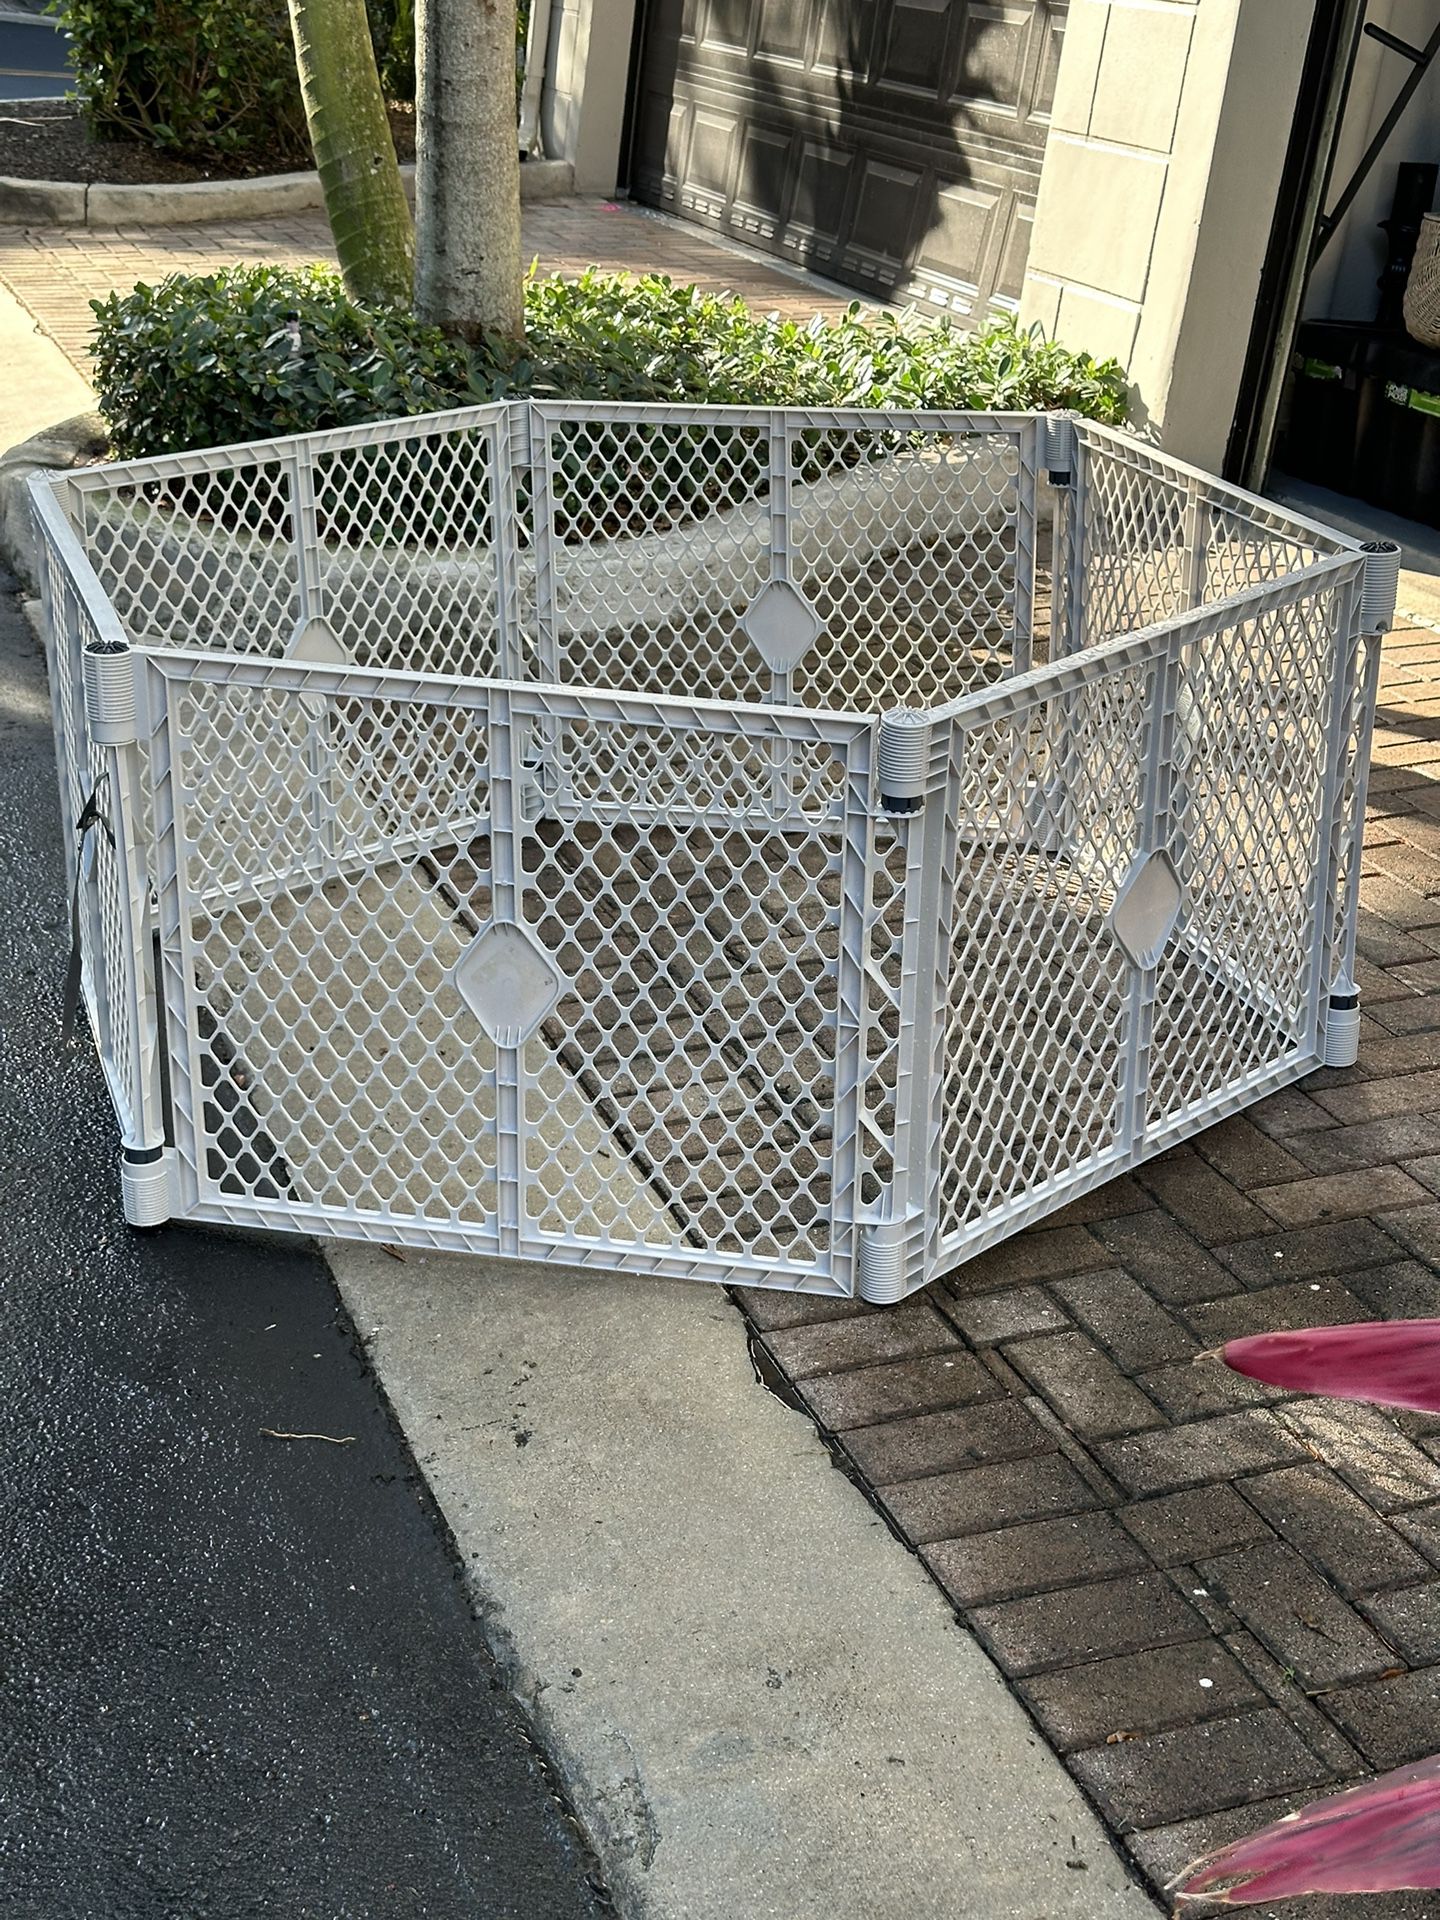 6 Panel Pet Super Yard Play Yard Fence Gate Each Panel Is 34w 26h